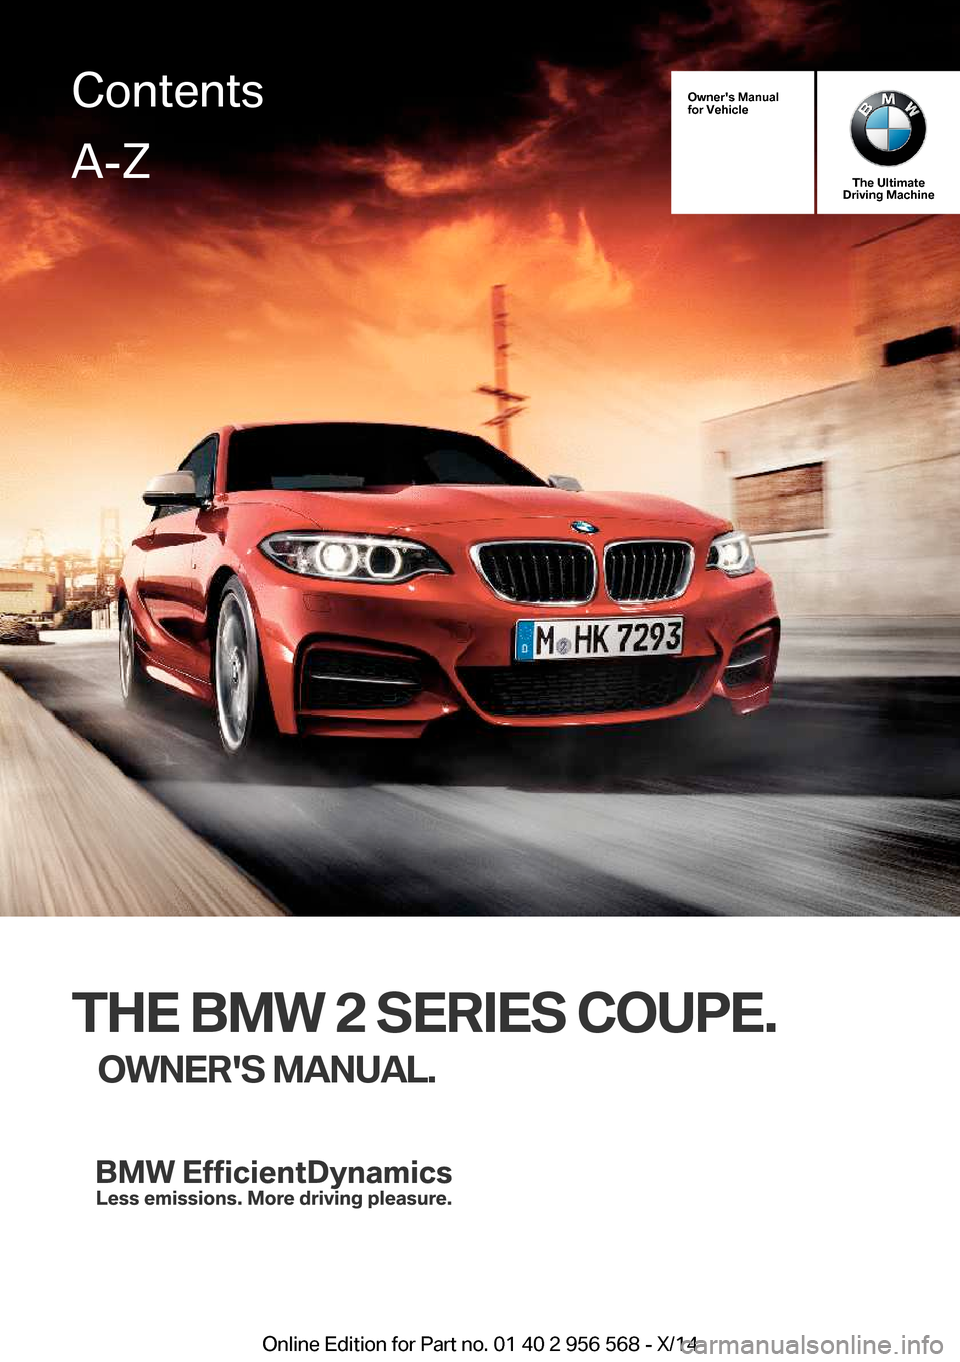 BMW 2 SERIES 2014 F22 Owners Manual Owners Manual
for Vehicle
The Ultimate
Driving Machine
THE BMW 2 SERIES COUPE.
OWNERS MANUAL.
ContentsA-Z
Online Edition for Part no. 01 40 2 956 568 - X/14   